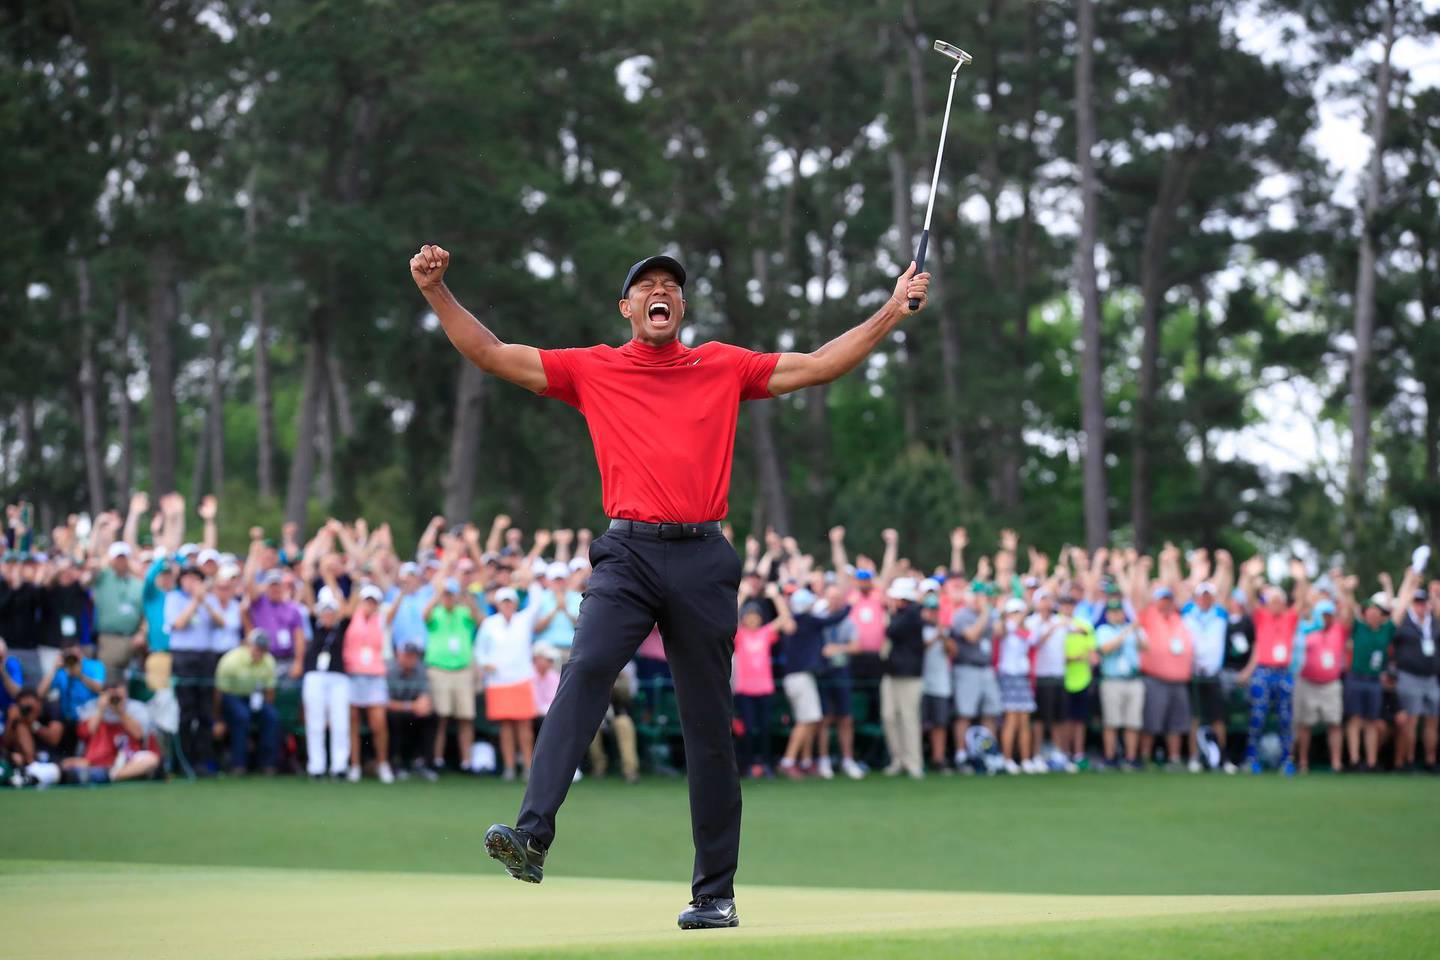 epa07507090 Tiger Woods of the US celebrates winning the 2019 Masters Tournament at the Augusta National Golf Club in Augusta, Georgia, USA, 14 April 2019. The 2019 Masters Tournament is held 11 April through 14 April 2019.  EPA/TANNEN MAURY